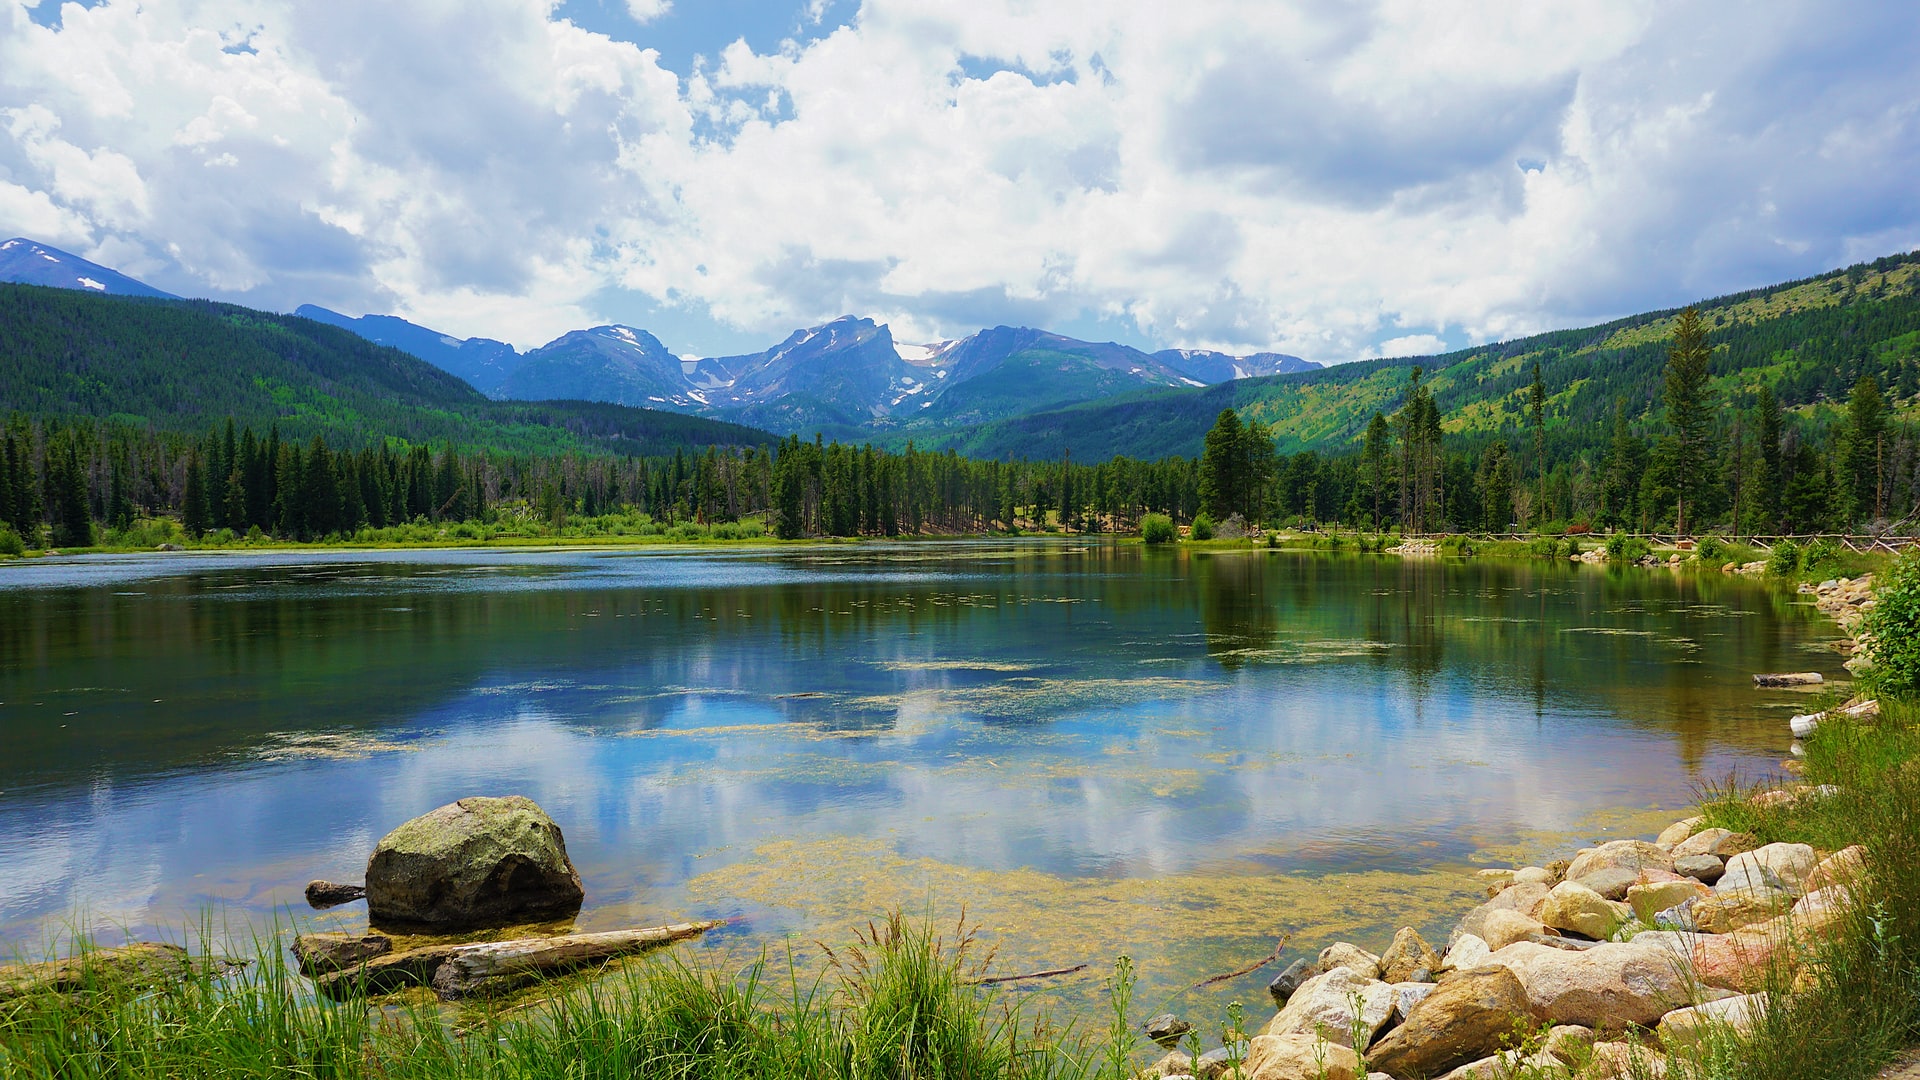 6 Places You Must See While in Colorado